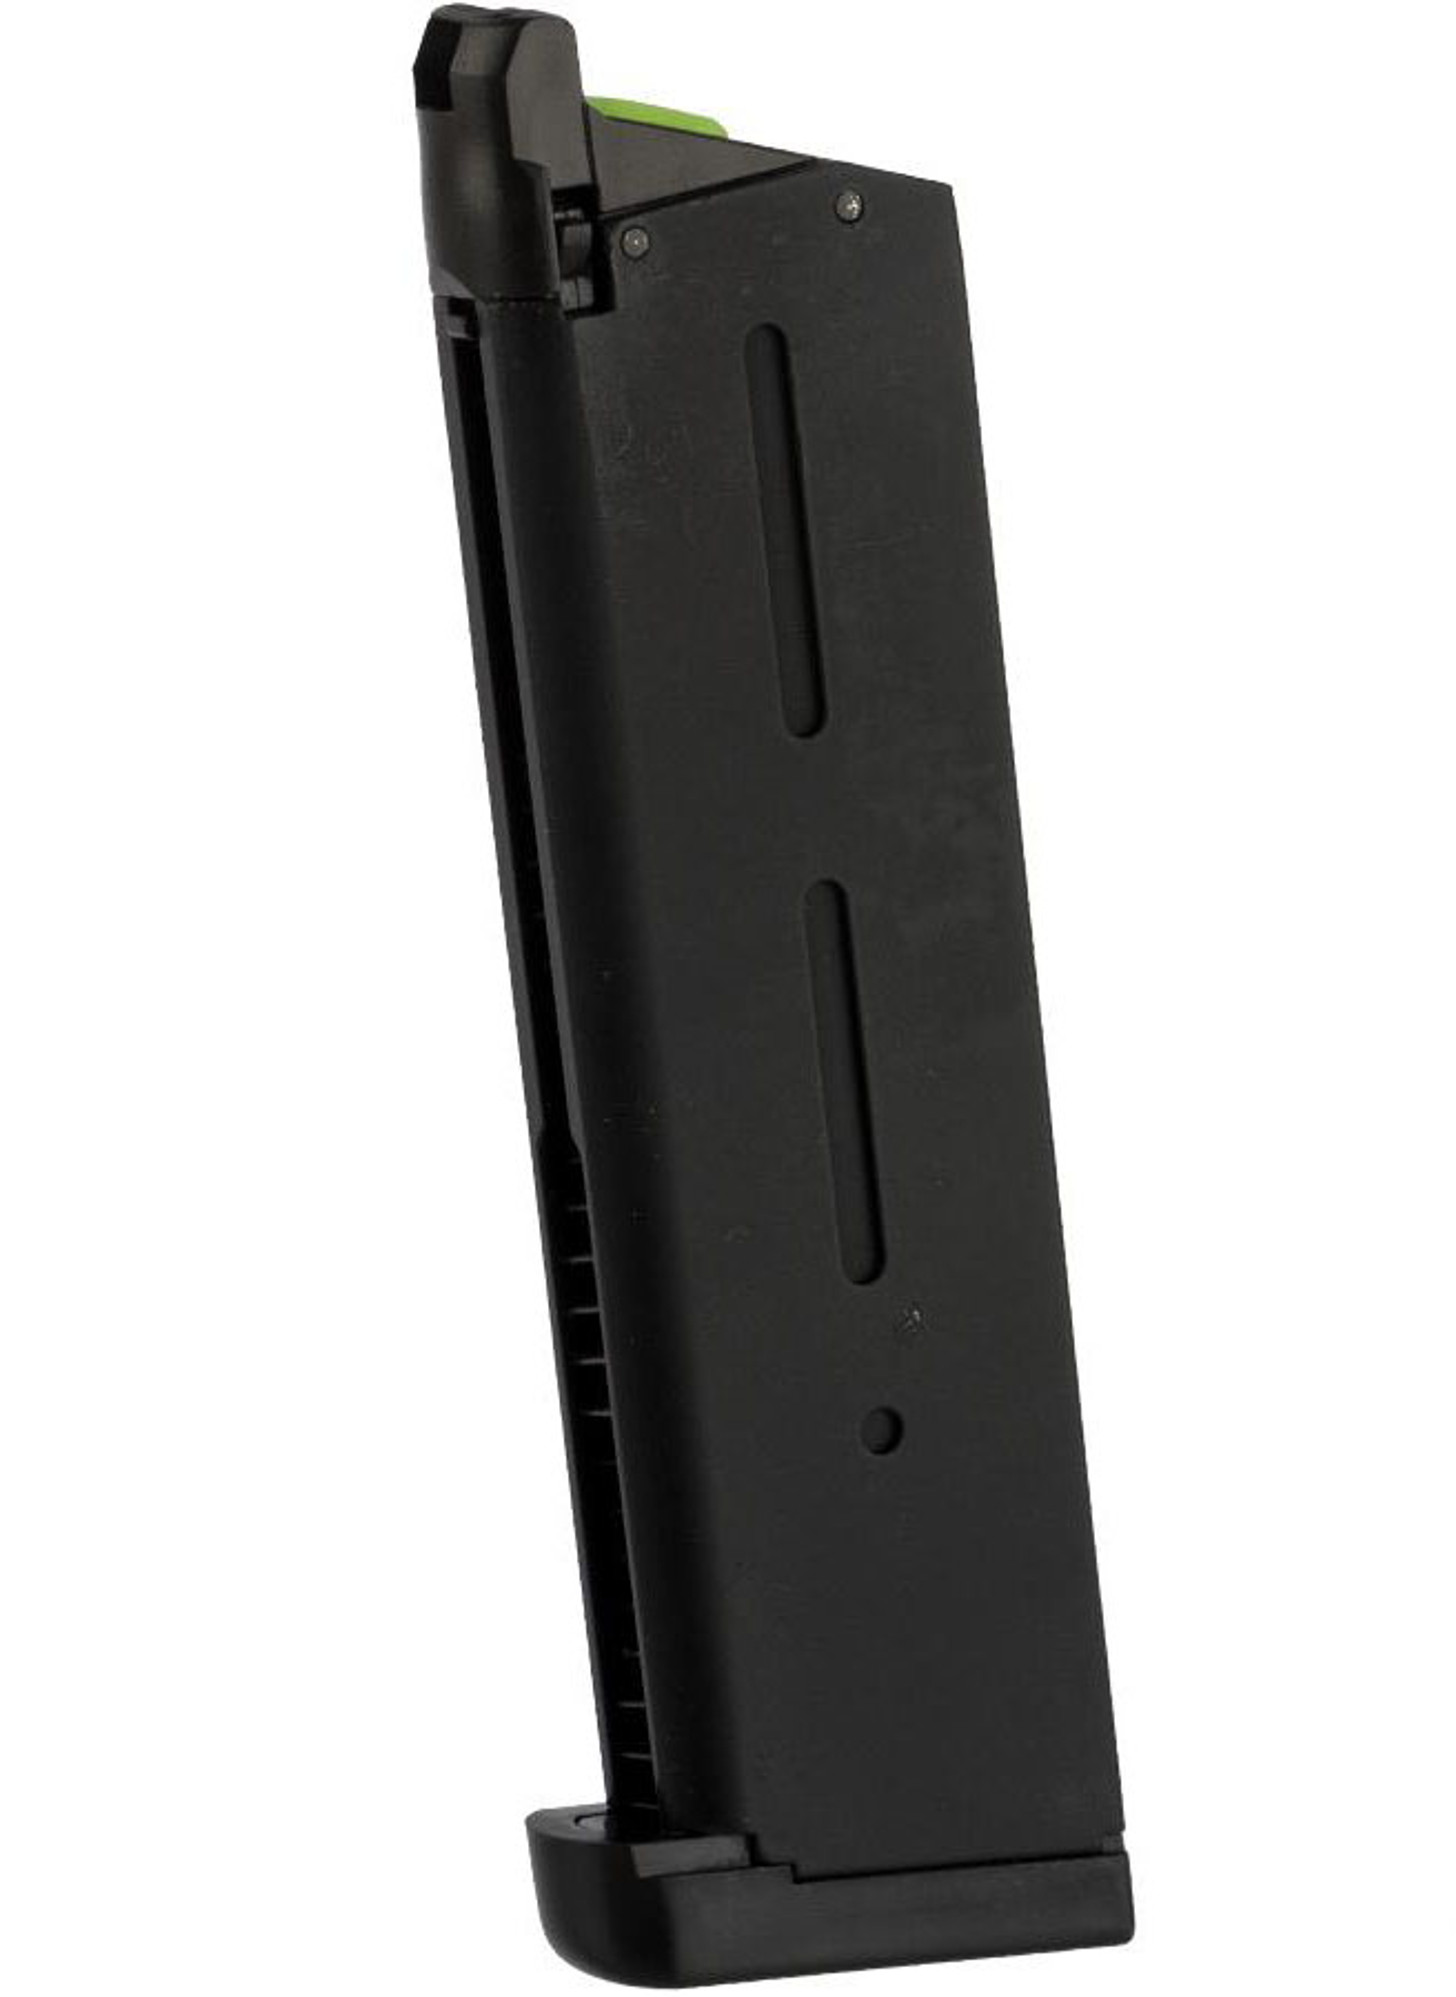 APS Single Stack 1911 Gas Magazine for TM Compatible 1911 Series GBB Pistols